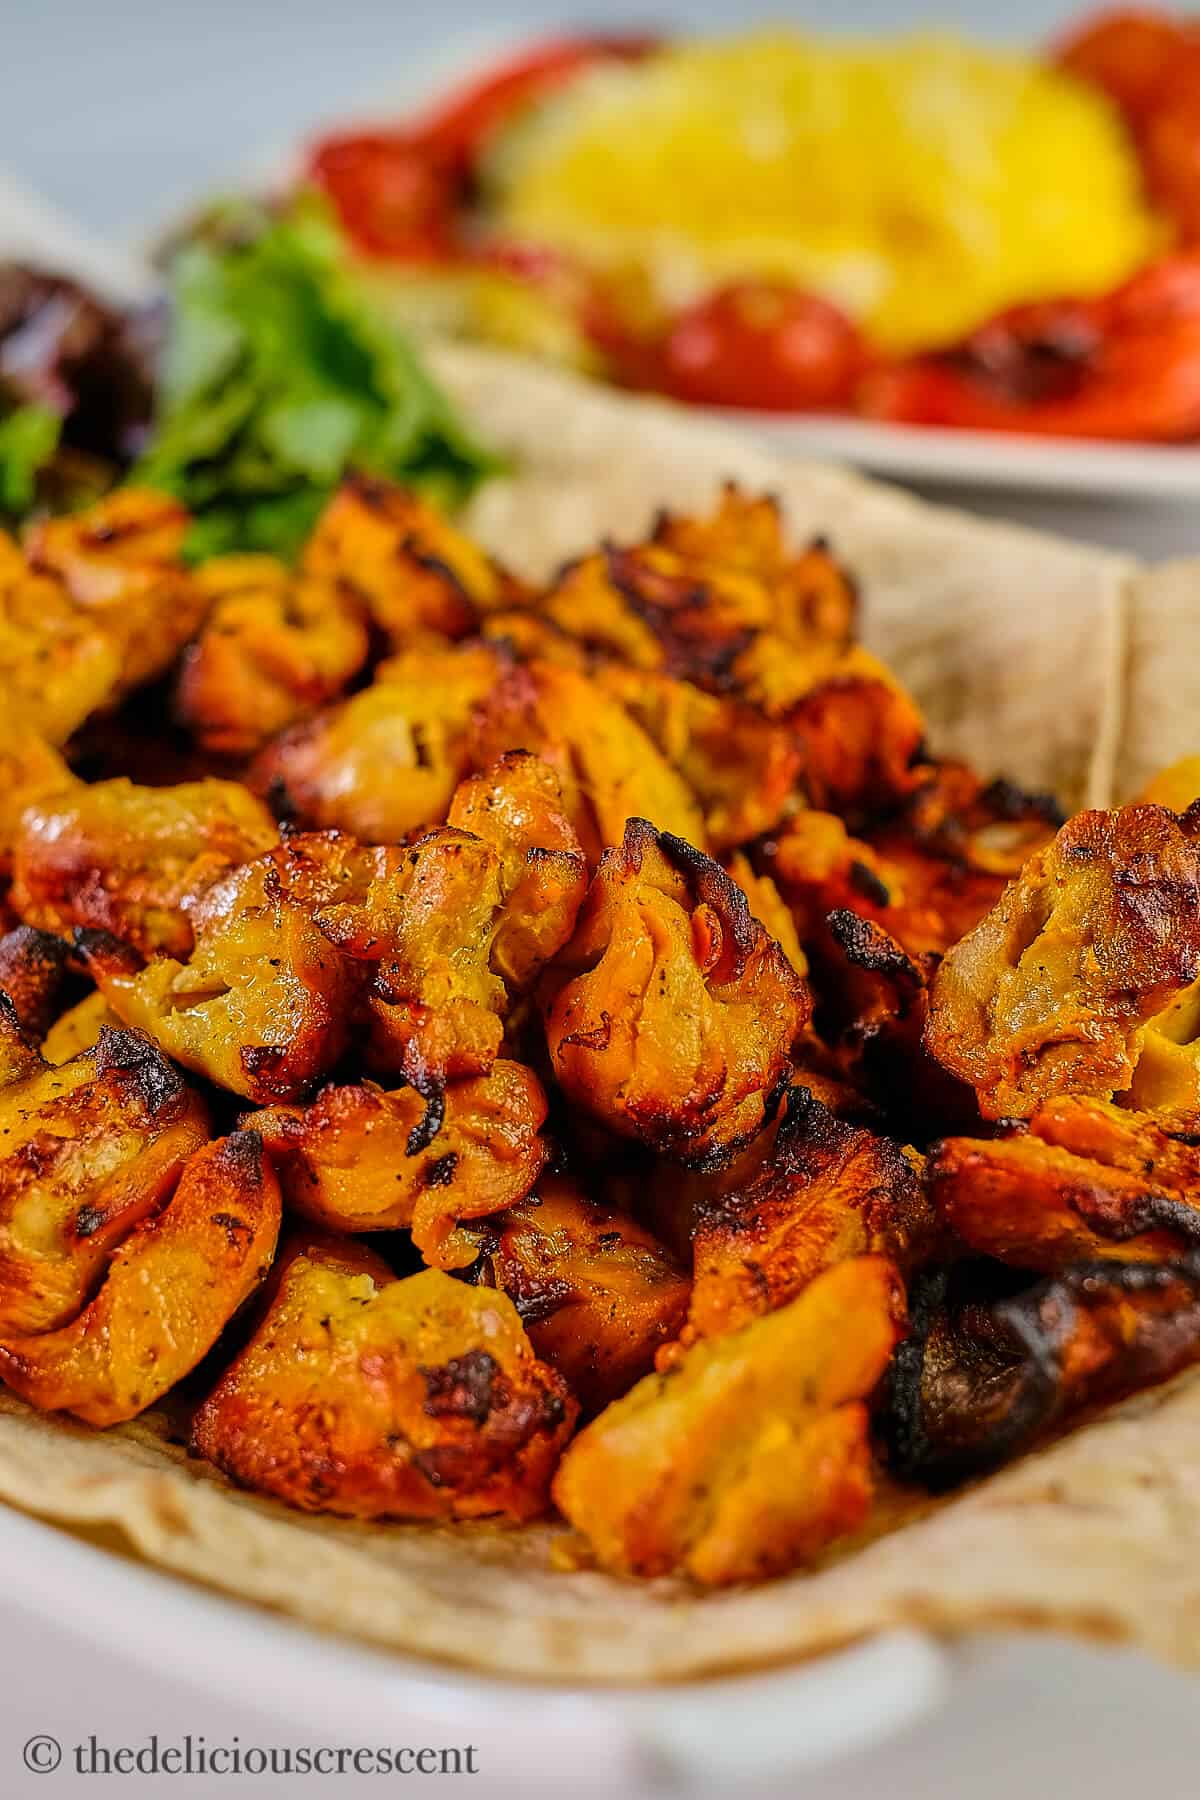 Jujeh kababs served on a plate.